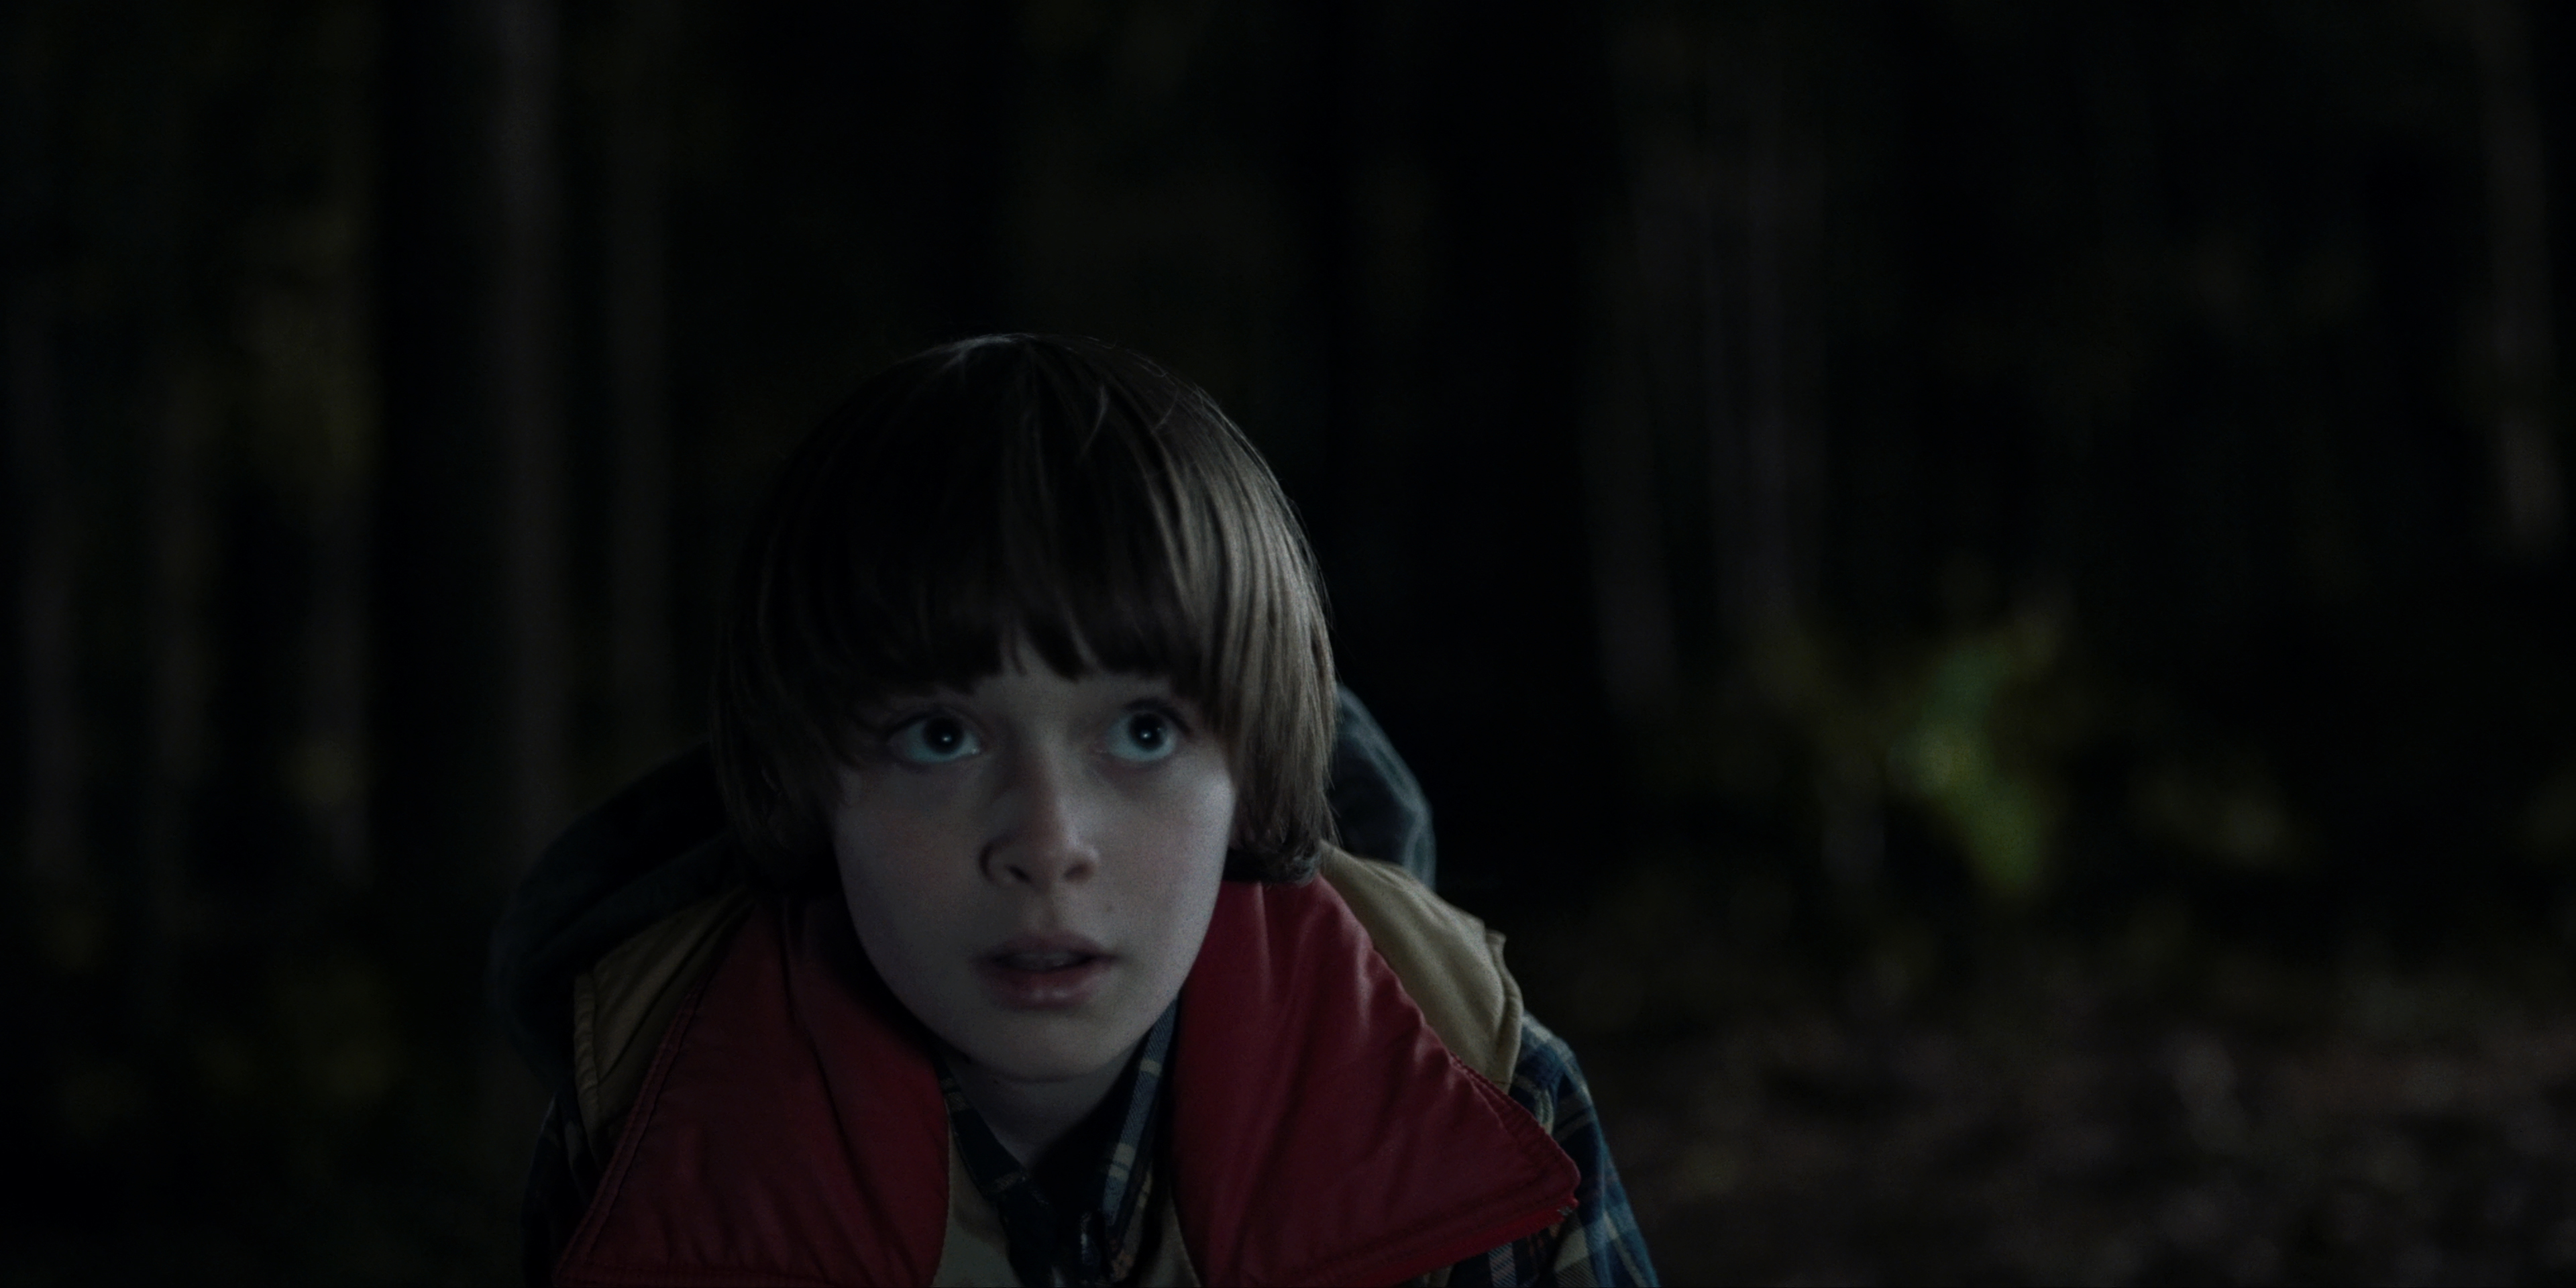 Stranger Things season 2: Will Byers will be a main focus